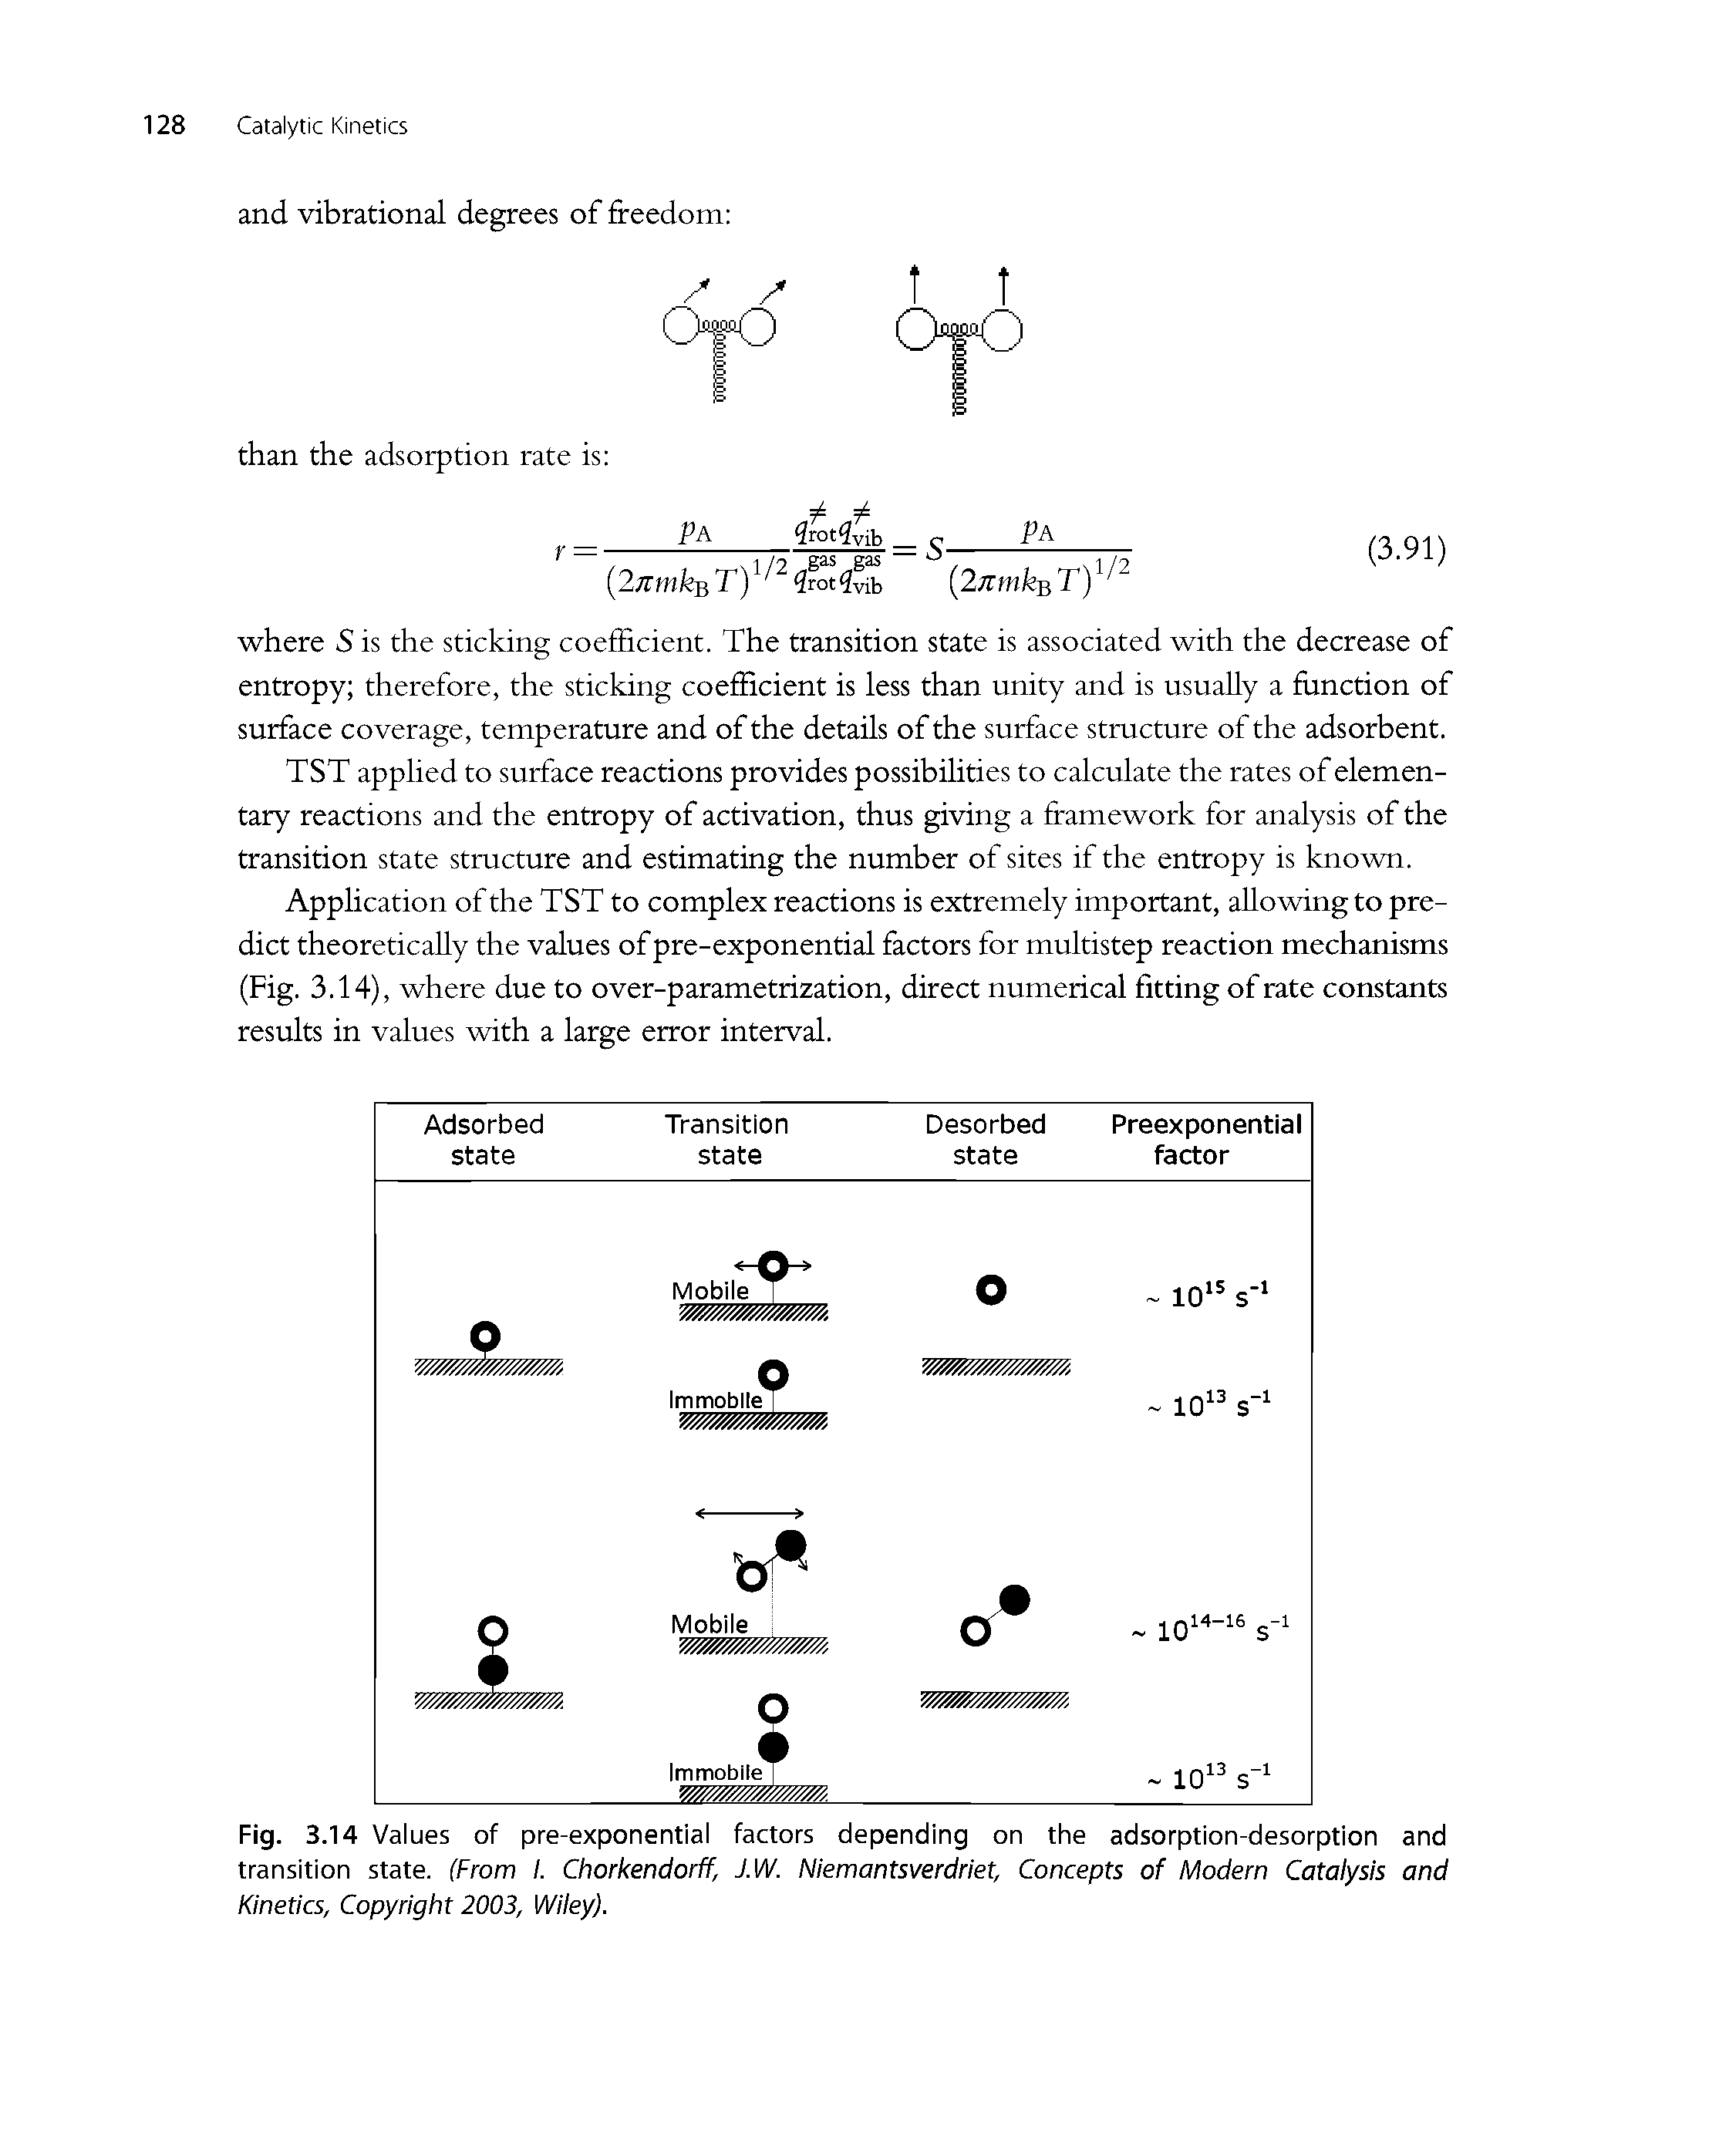 Fig. 3.14 Values of pre-exponential factors depending on the adsorption-desorption and transition state. (From I. Chorkendorff, J.W. Niemantsverdriet, Concepts of Modern Catalysis and Kinetics, Copyright 2003, Wiley).